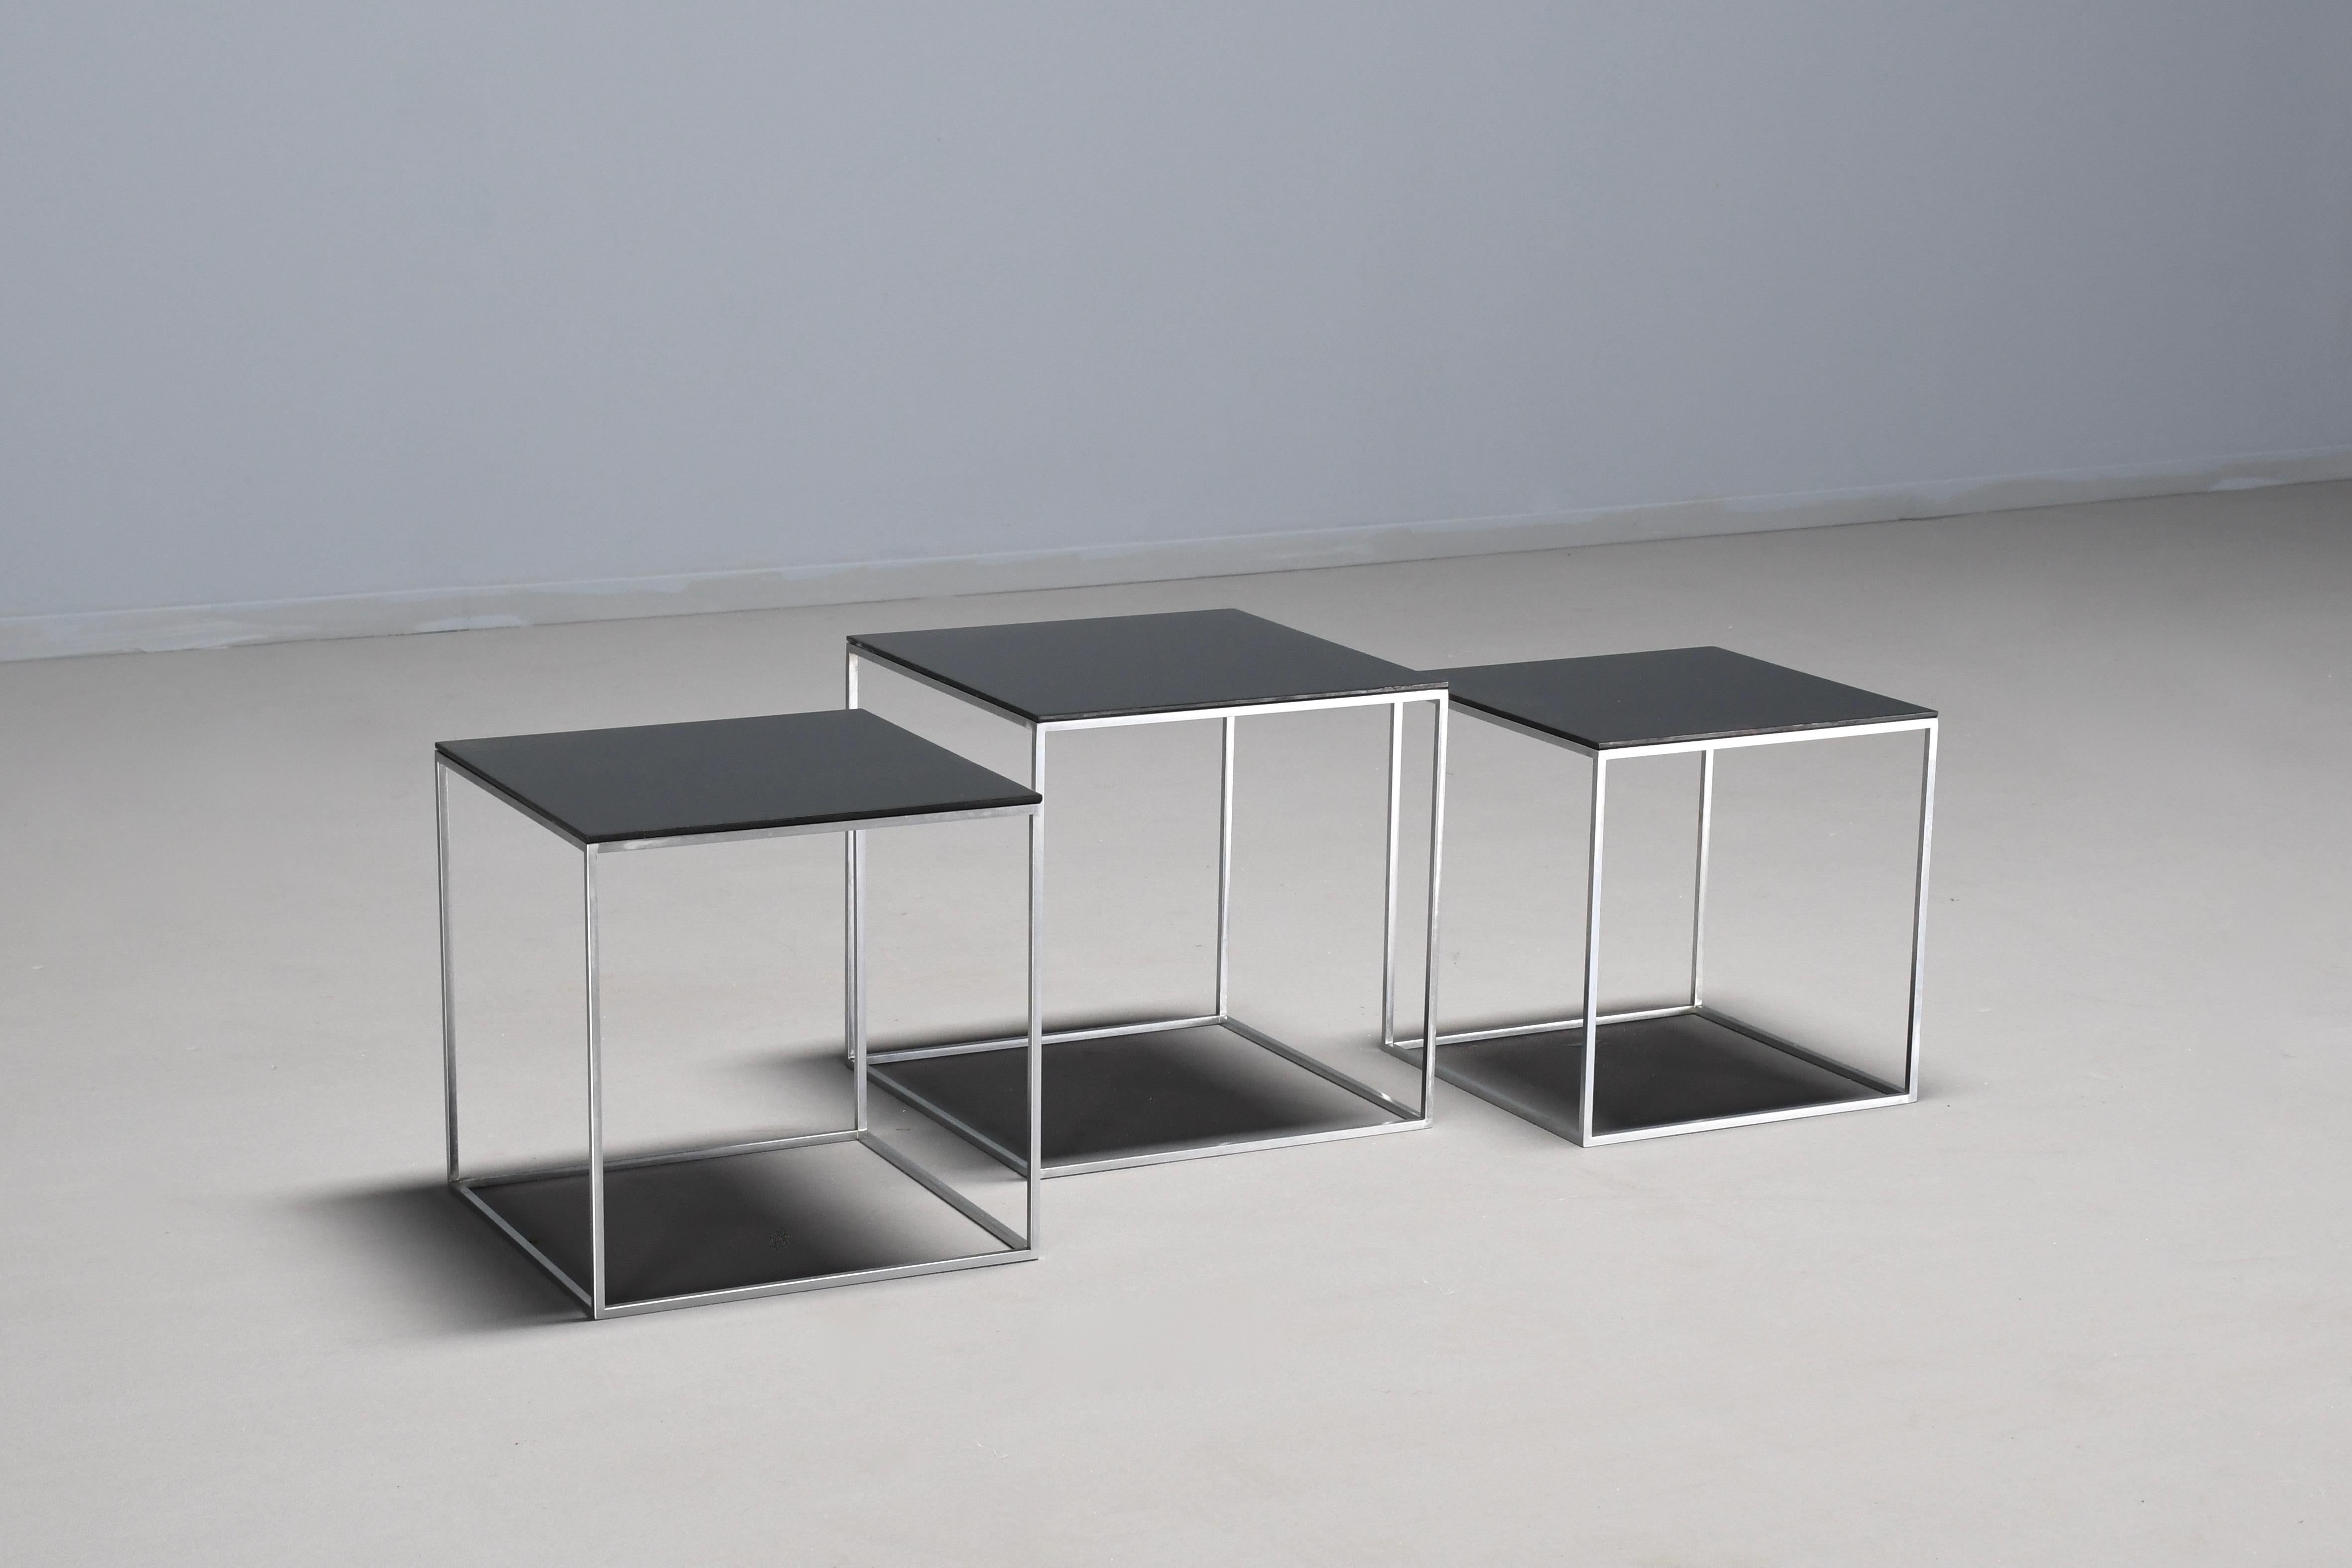 Beautiful set of PK71 nesting tables in very good condition 

Designed by Poul Kjaerholm in 1957.

These particular tables are manufactured by E. Kold Christensen and are marked ‘Denmark’

The minimalist shaped tables have a square steel frame with